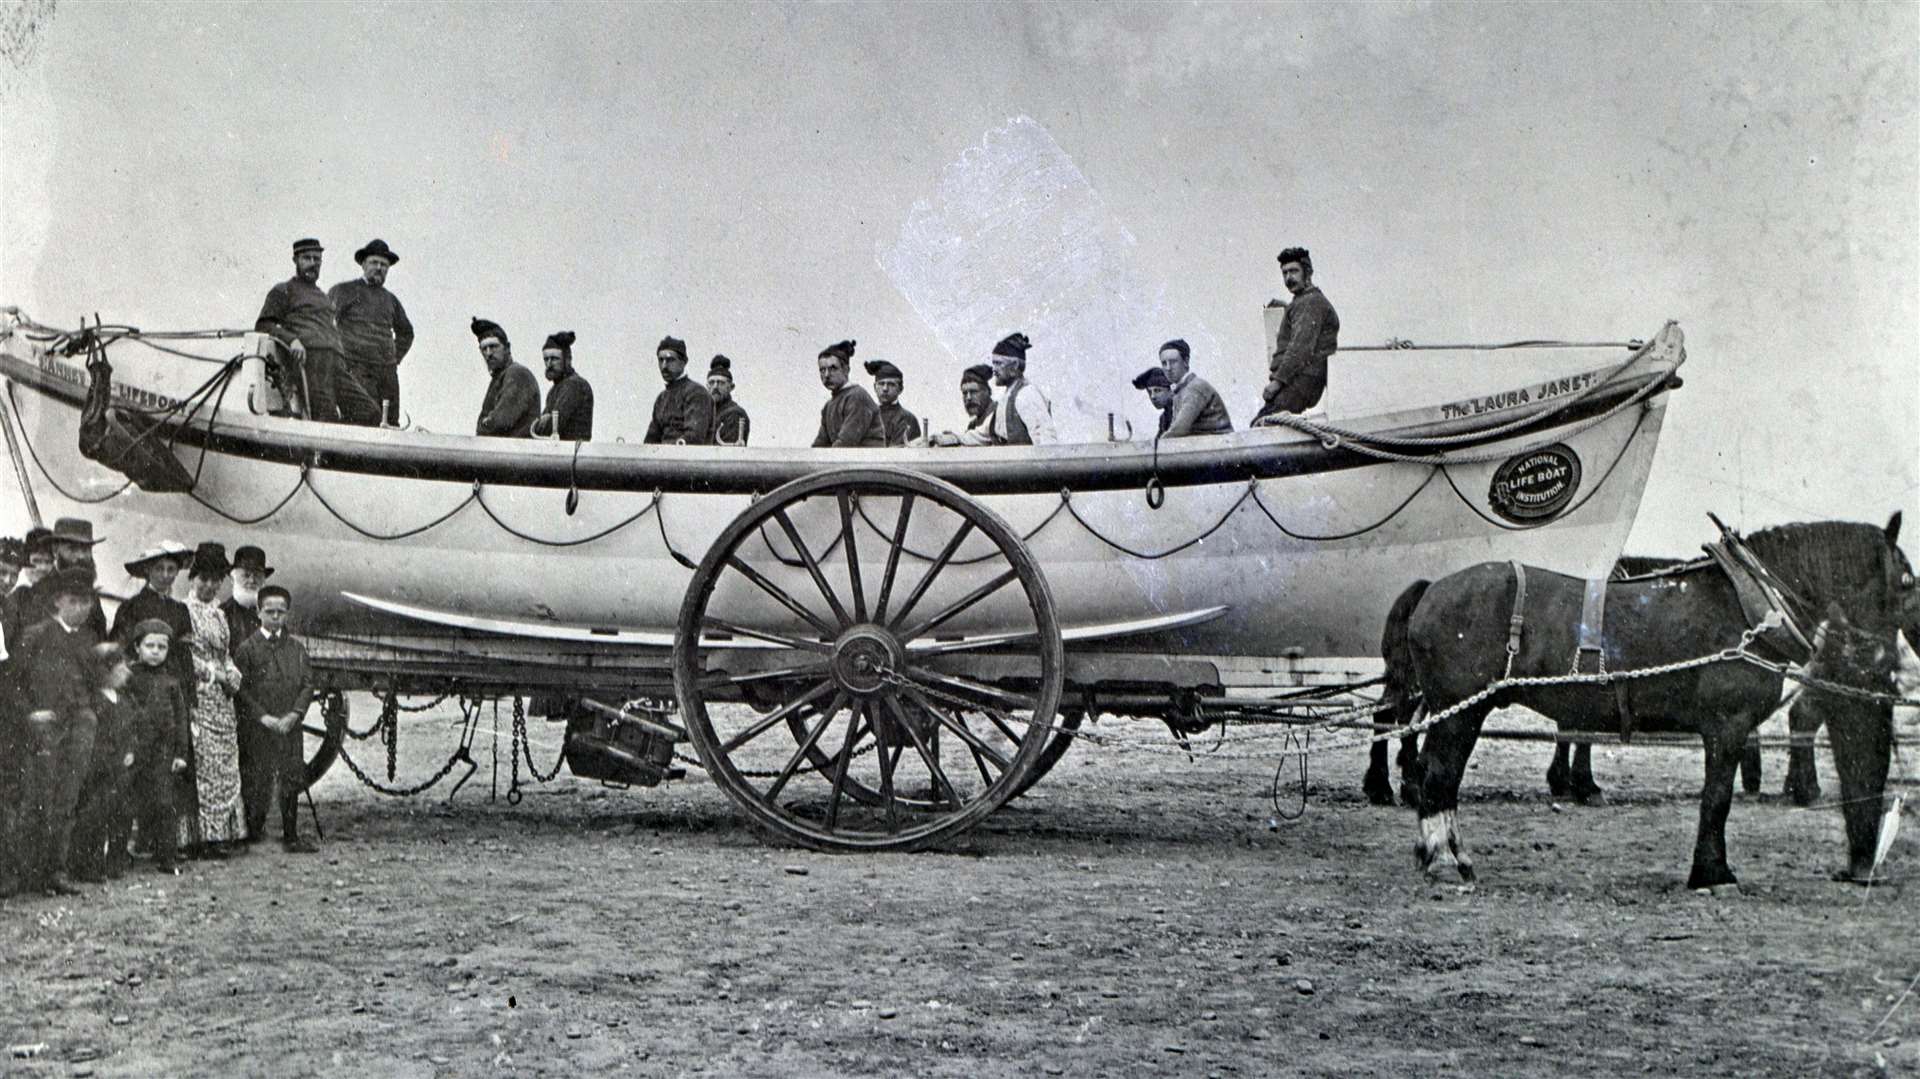 St Anne's lifeboat the Laura Janet, was lost with most of her crew in the 1886 Mexico disaster however the tragedy prompted the public to begin involving themselves heavily in fundraising. Image: RNLI.